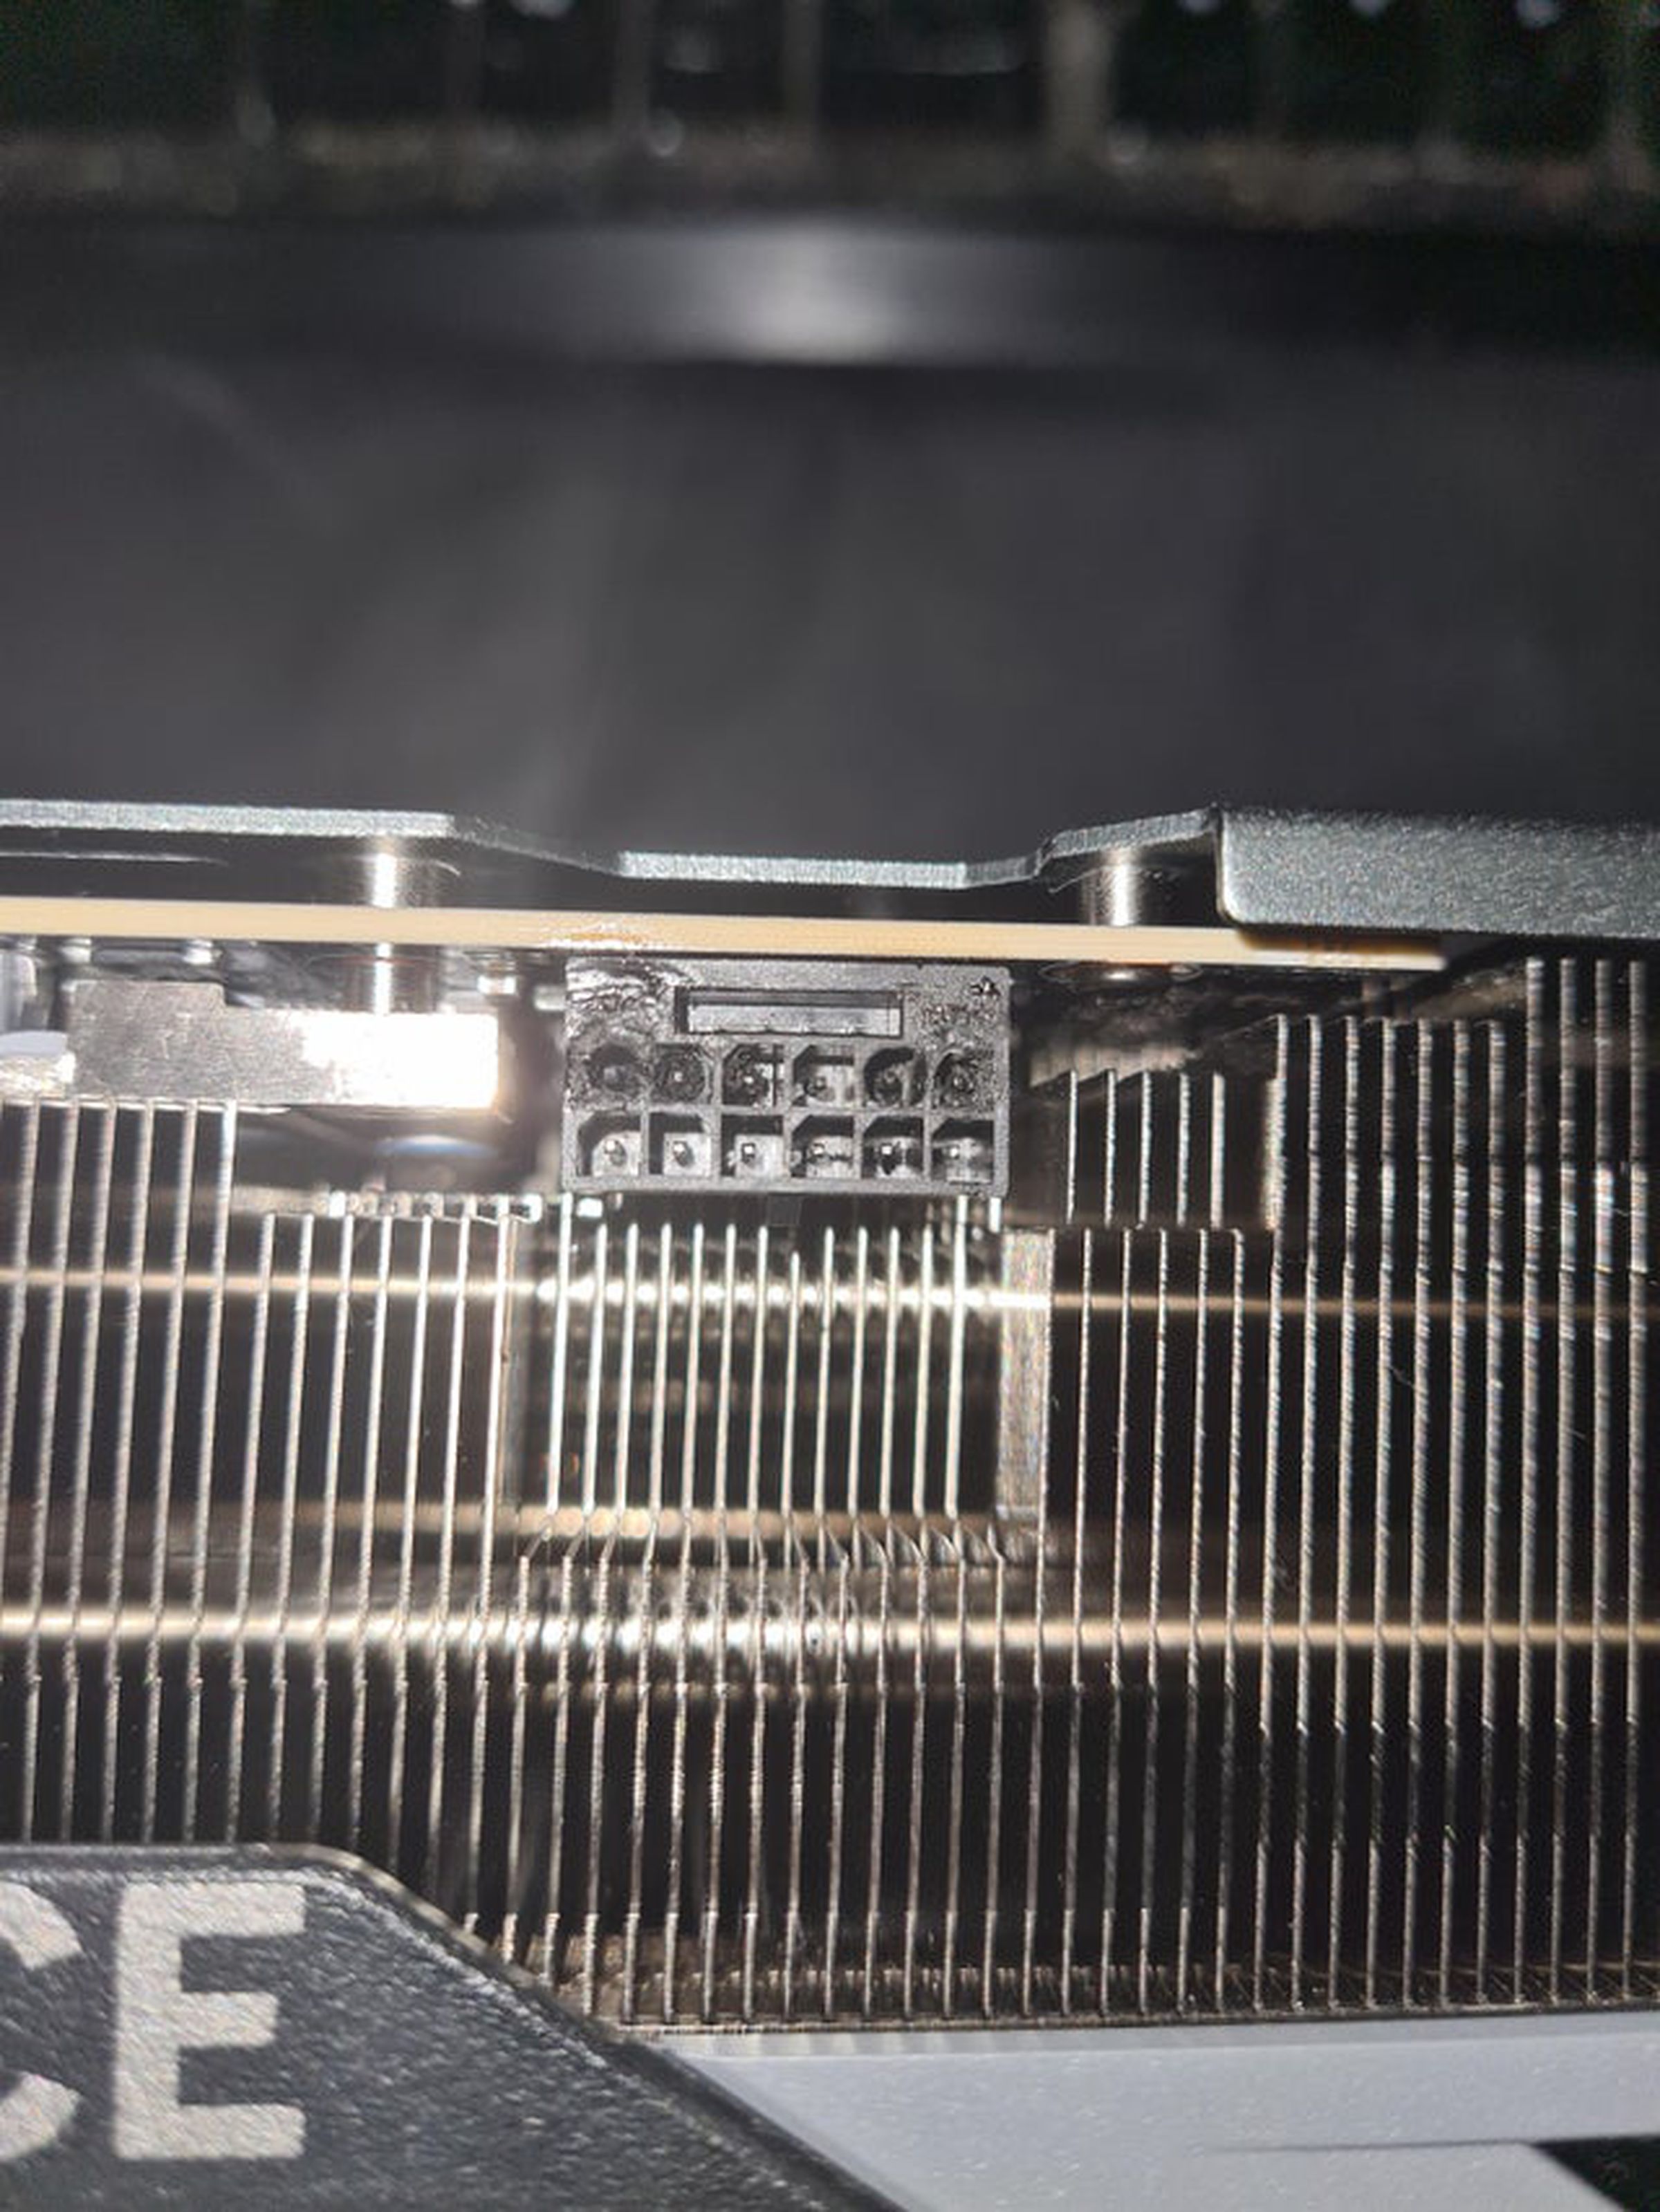 Burn damage to the power connector on the RTX 4090.